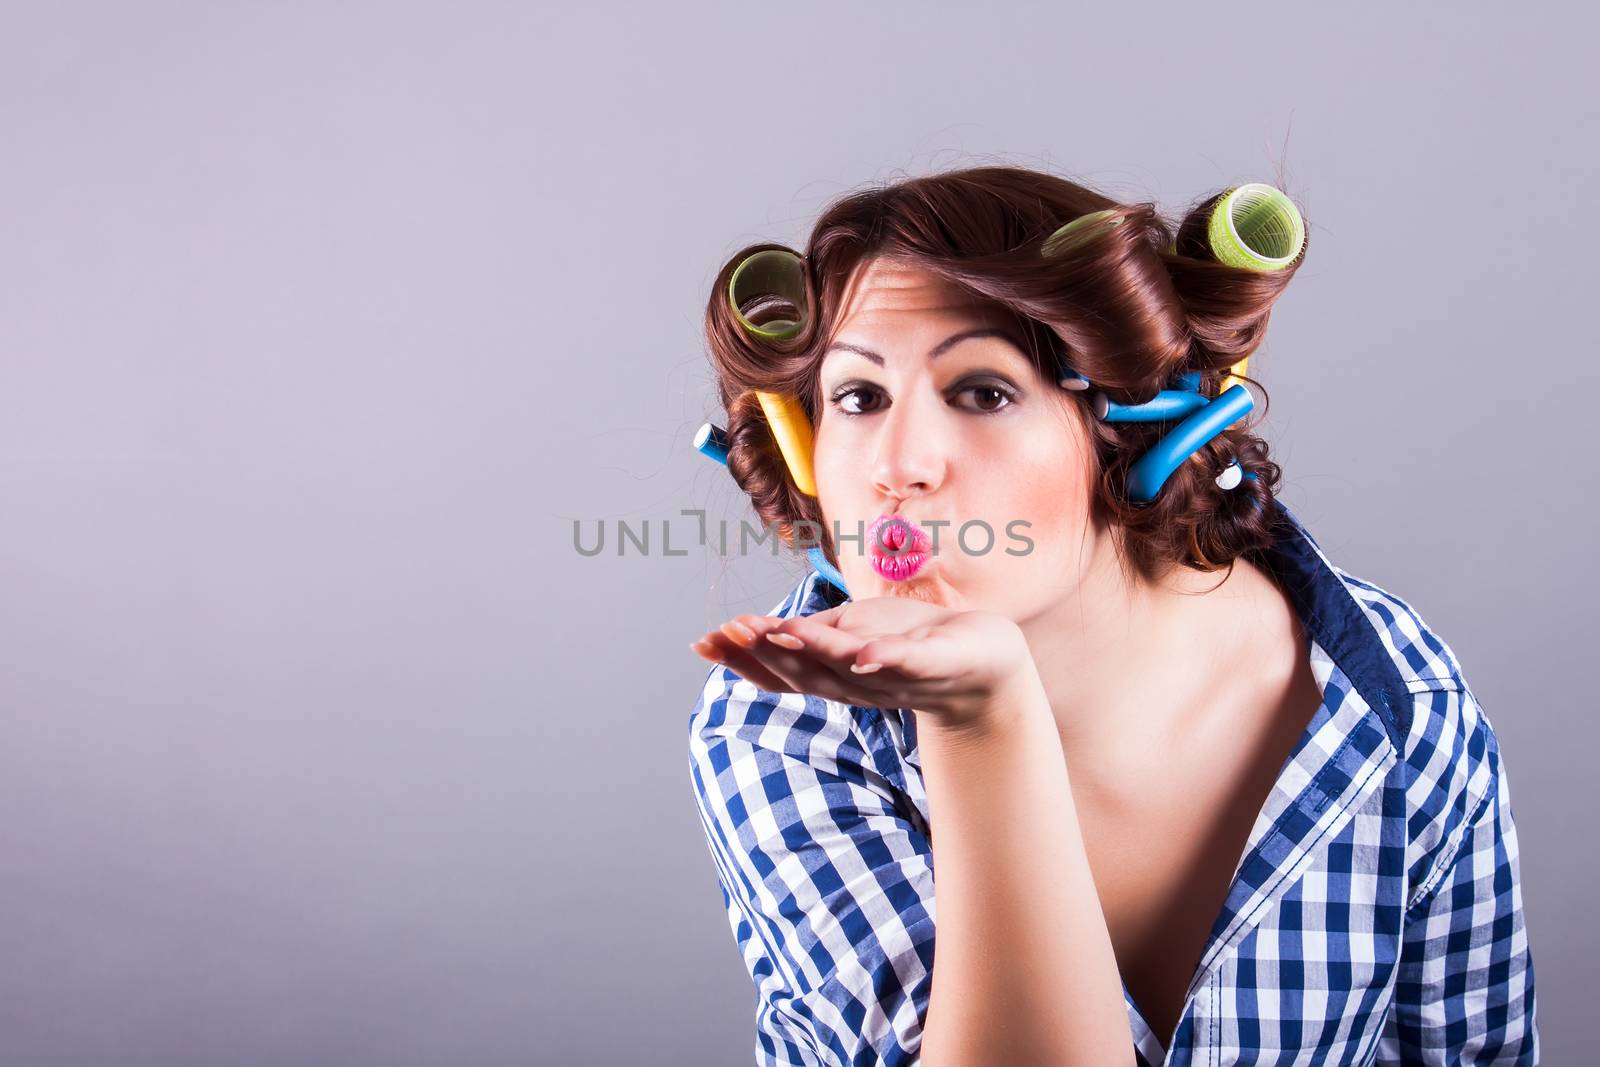 portrait of sexy housewife with curlers. pin up portrait